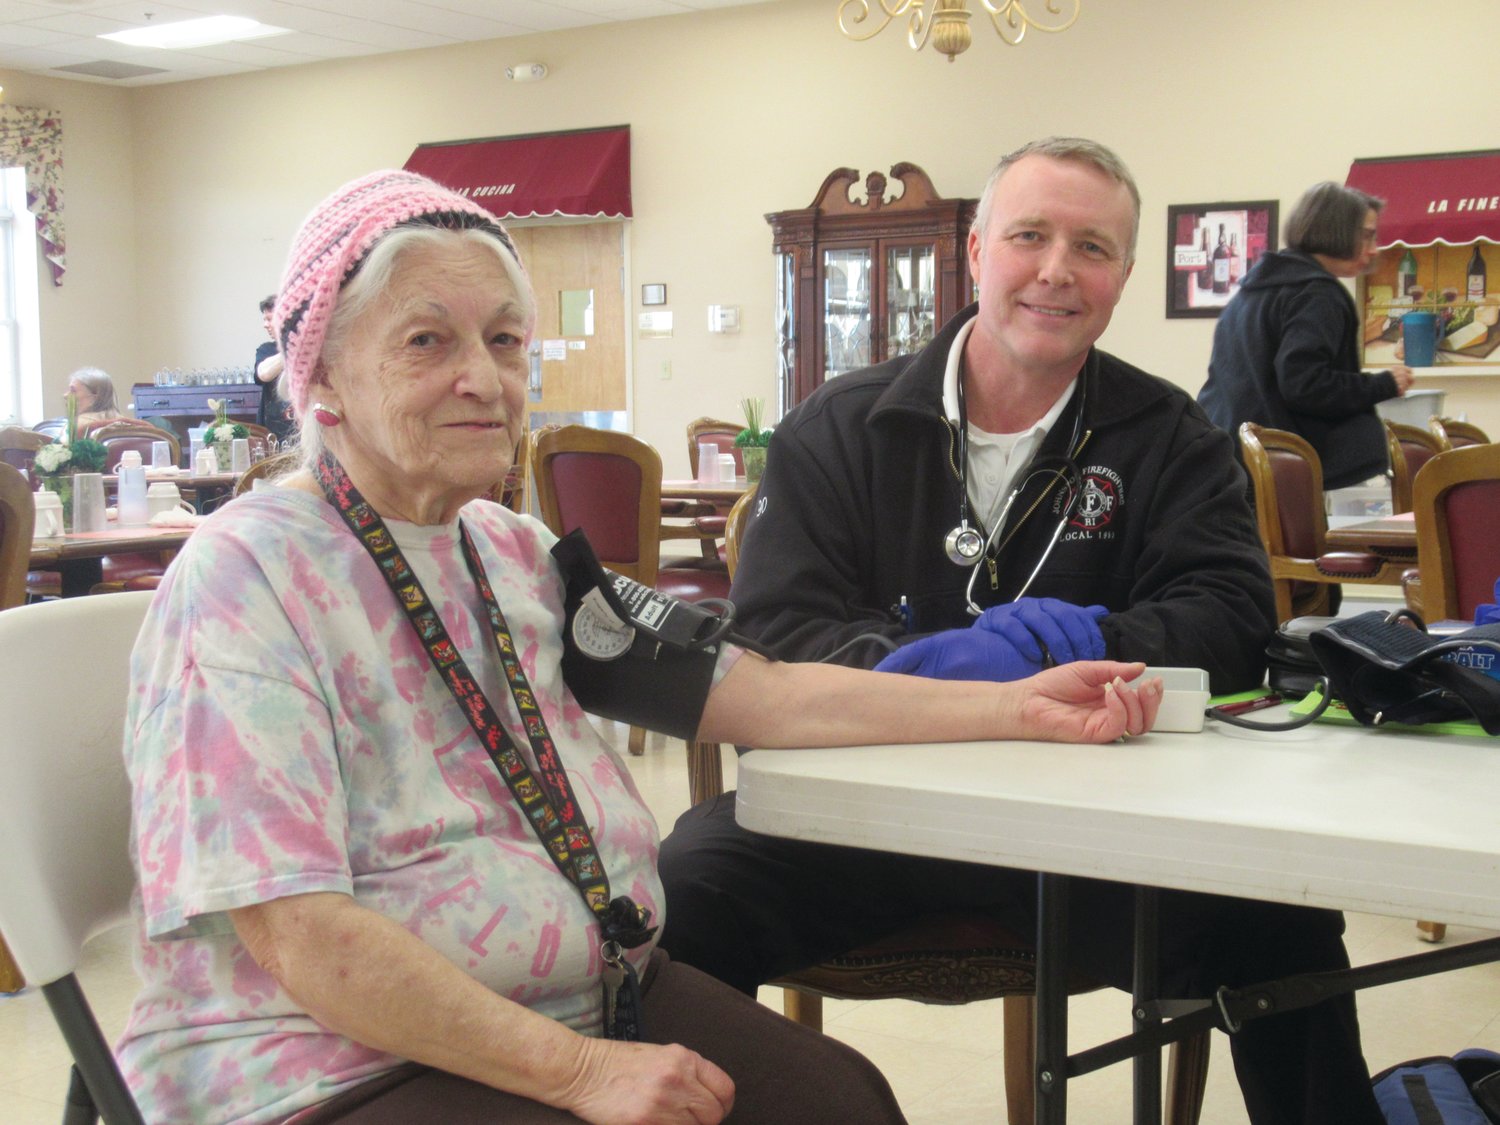 SMILING SERVICE: JFD Battalion Chief Tom McCormick adjusts a blood pressure monitor to the arm of Gloria Renzi during last Thursday’s unique and first-ever Blood Pressure Screening Event at the Johnston Senior Center.